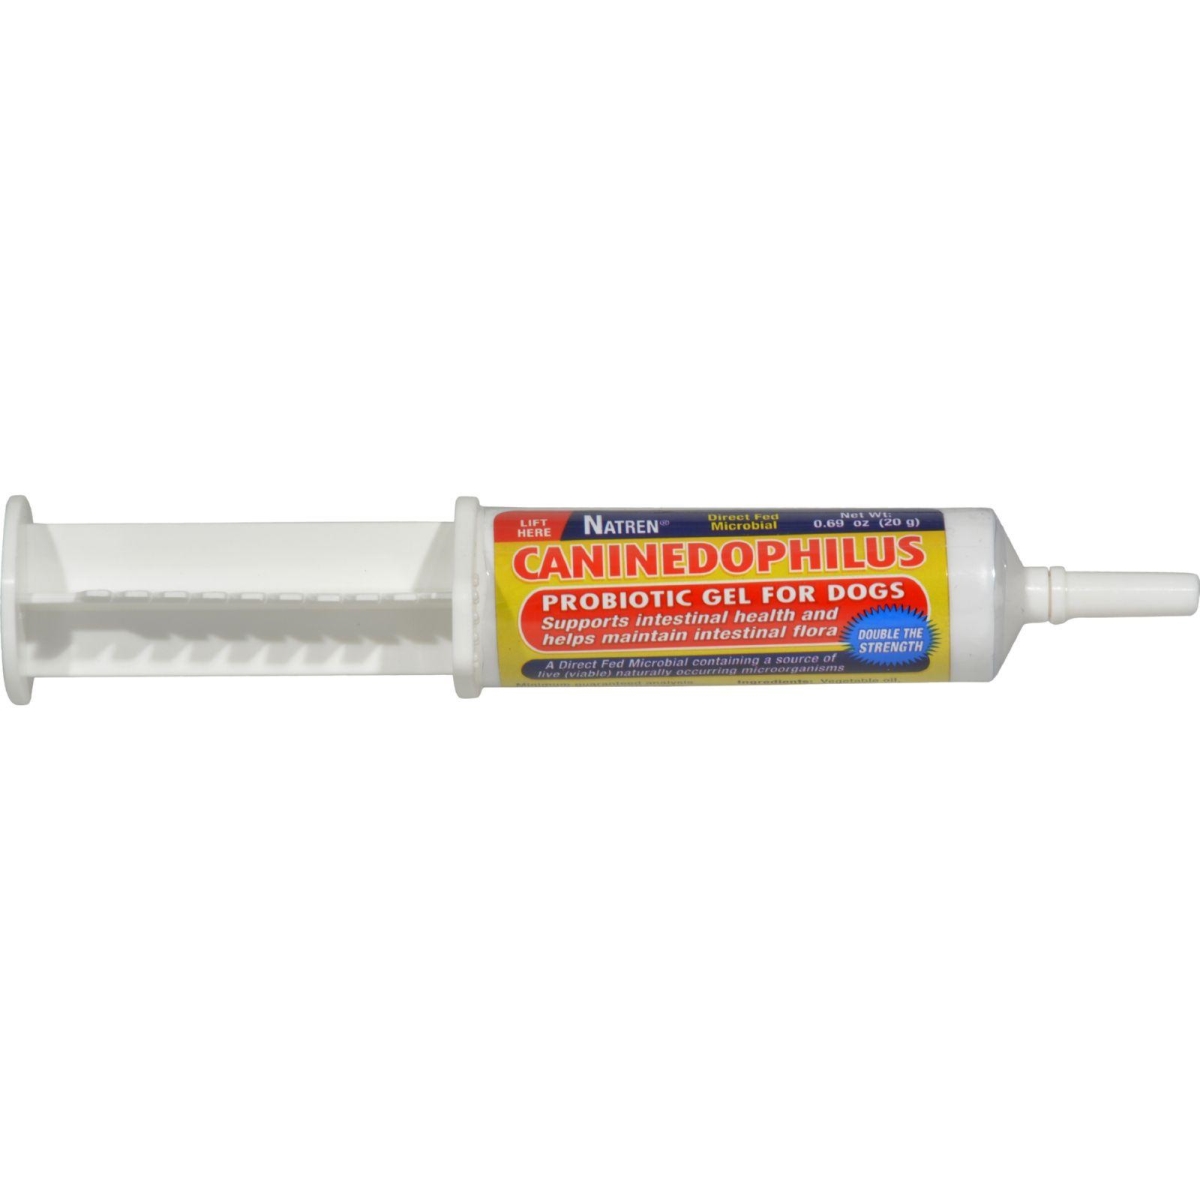 Hg0778035 20 Ml Caninedophilus For Dogs